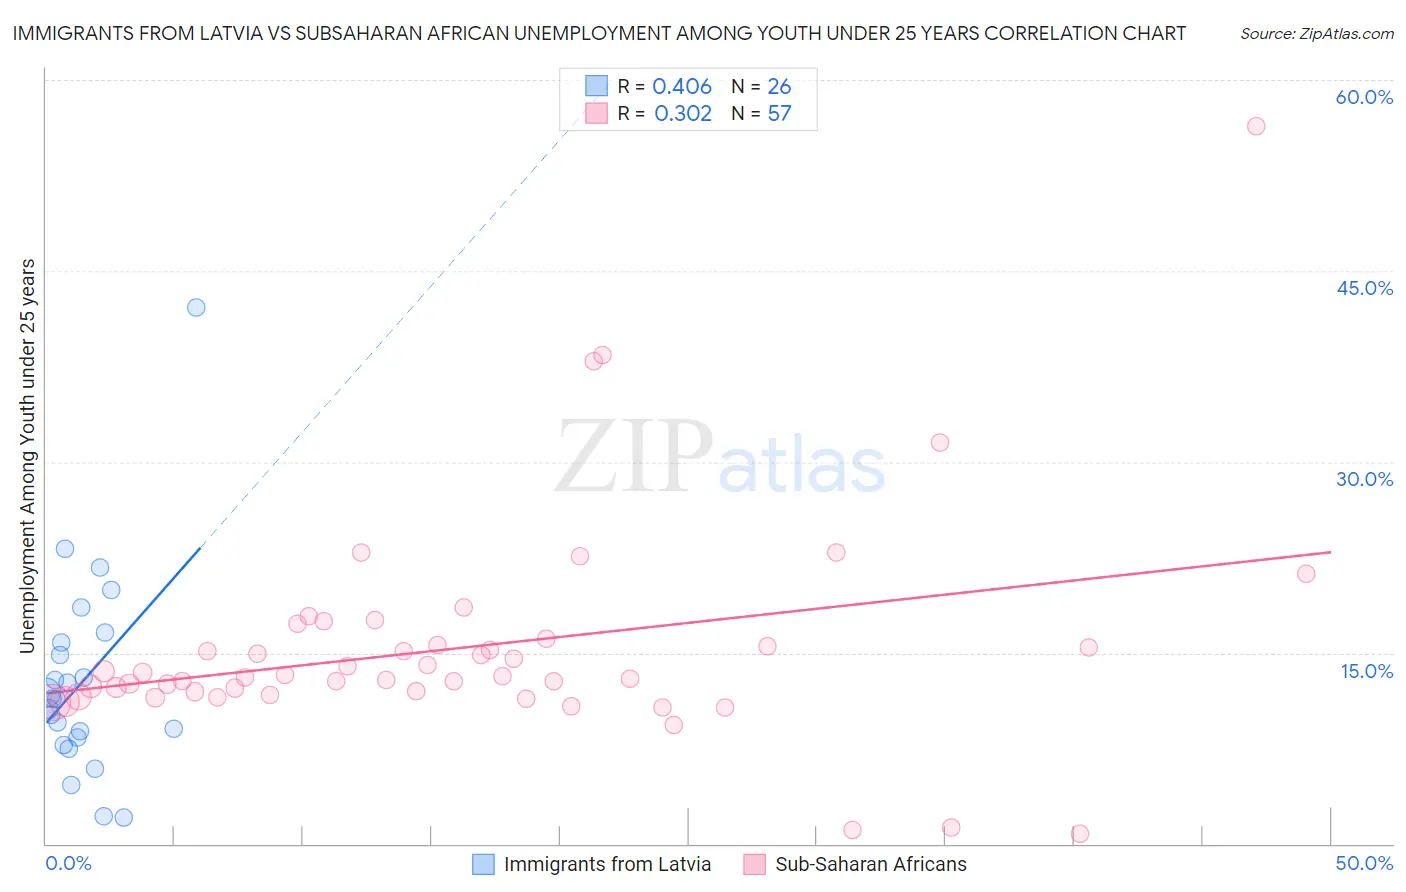 Immigrants from Latvia vs Subsaharan African Unemployment Among Youth under 25 years